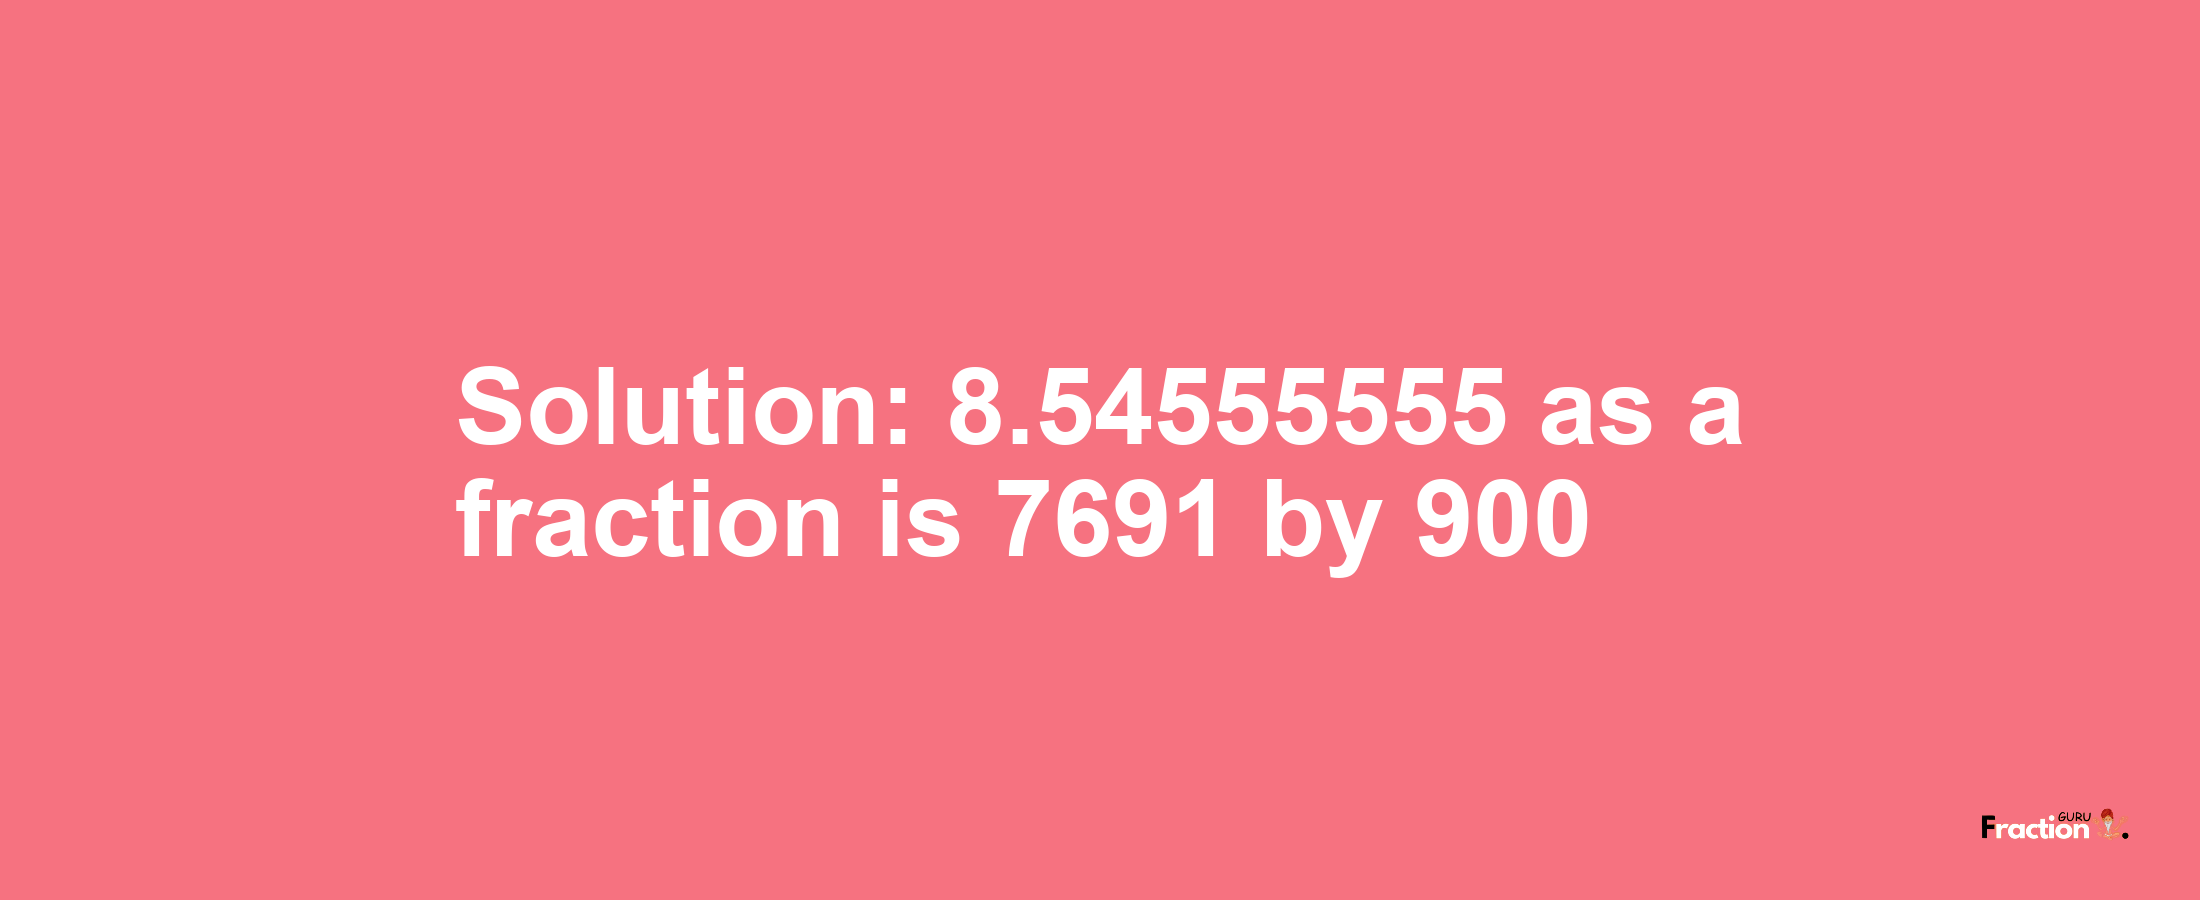 Solution:8.54555555 as a fraction is 7691/900